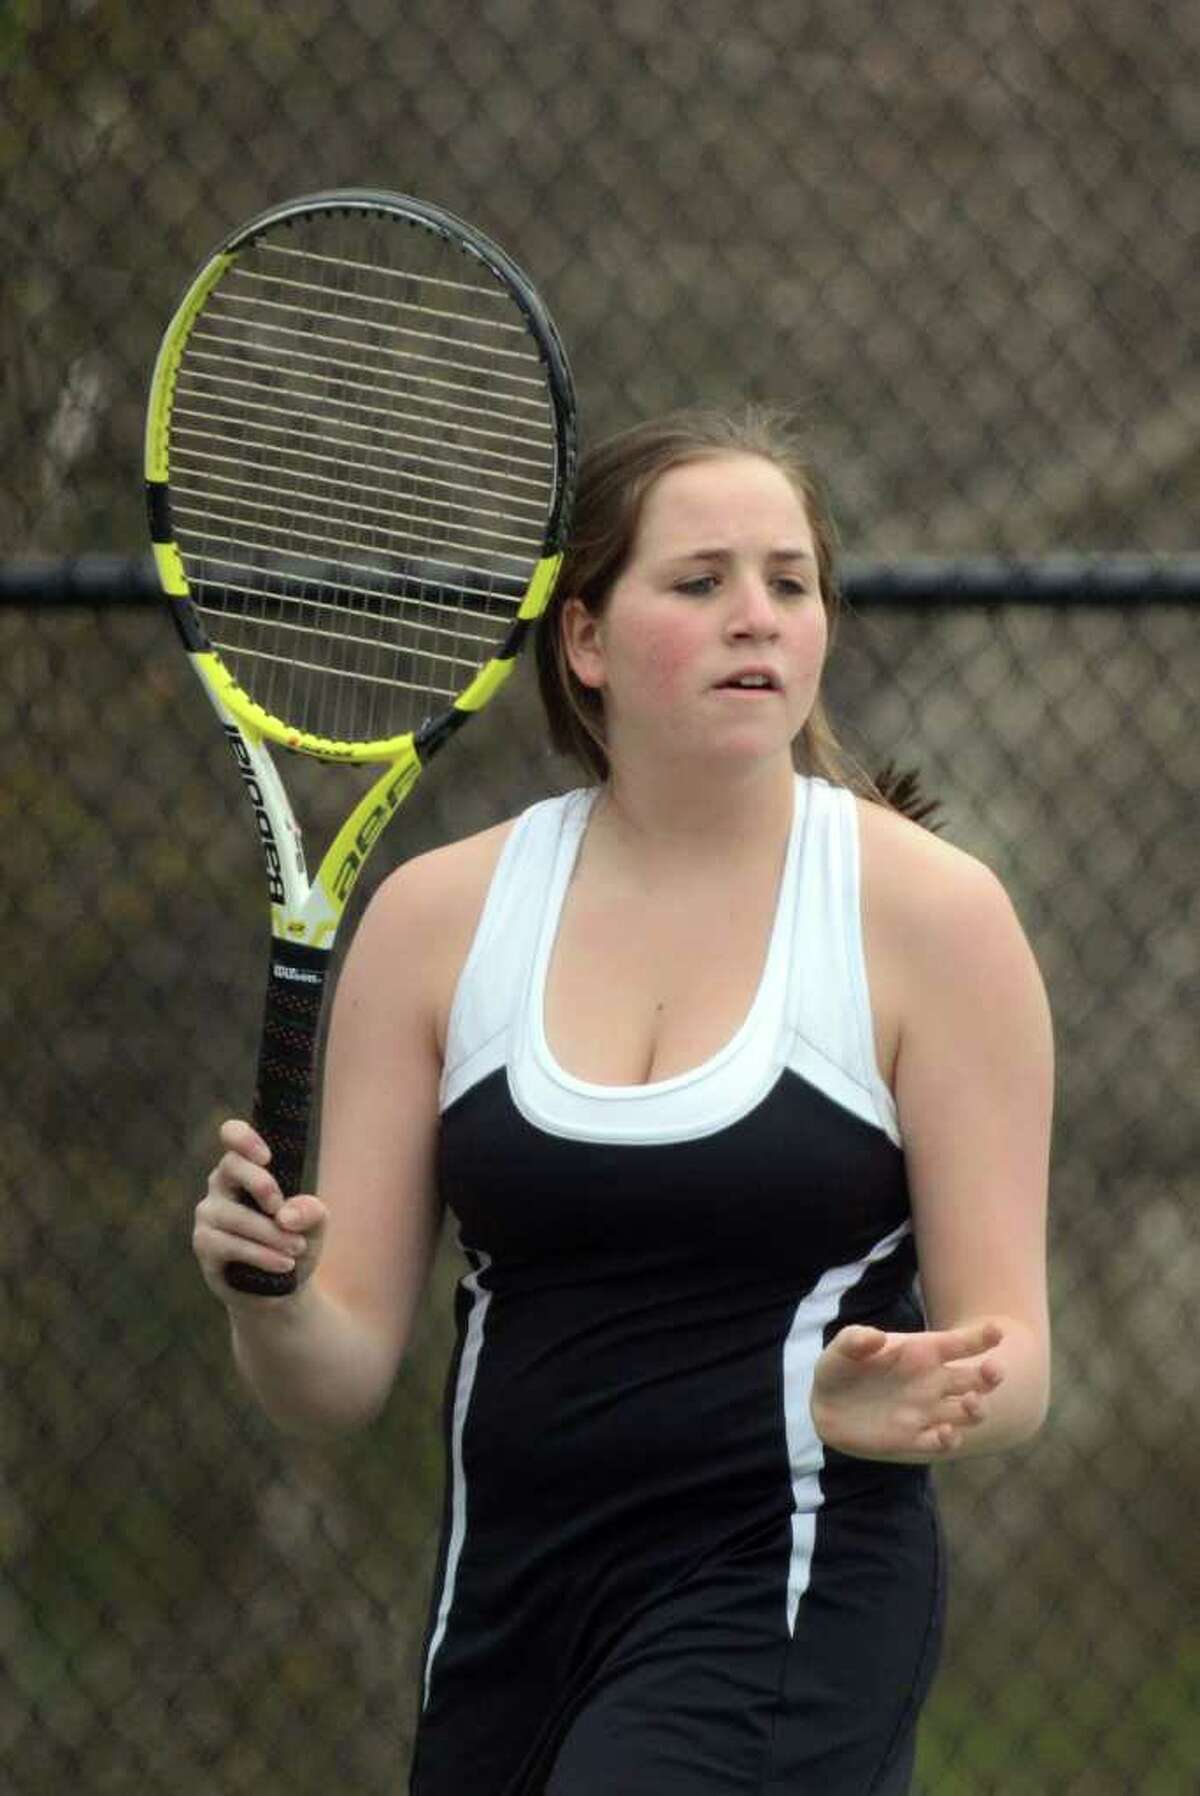 Fairfield Warde's Christie Schneider, no. 1 singles, returns the serve during the girls tennis match against Staples at Warde on Monday, Apr. 18, 2011.